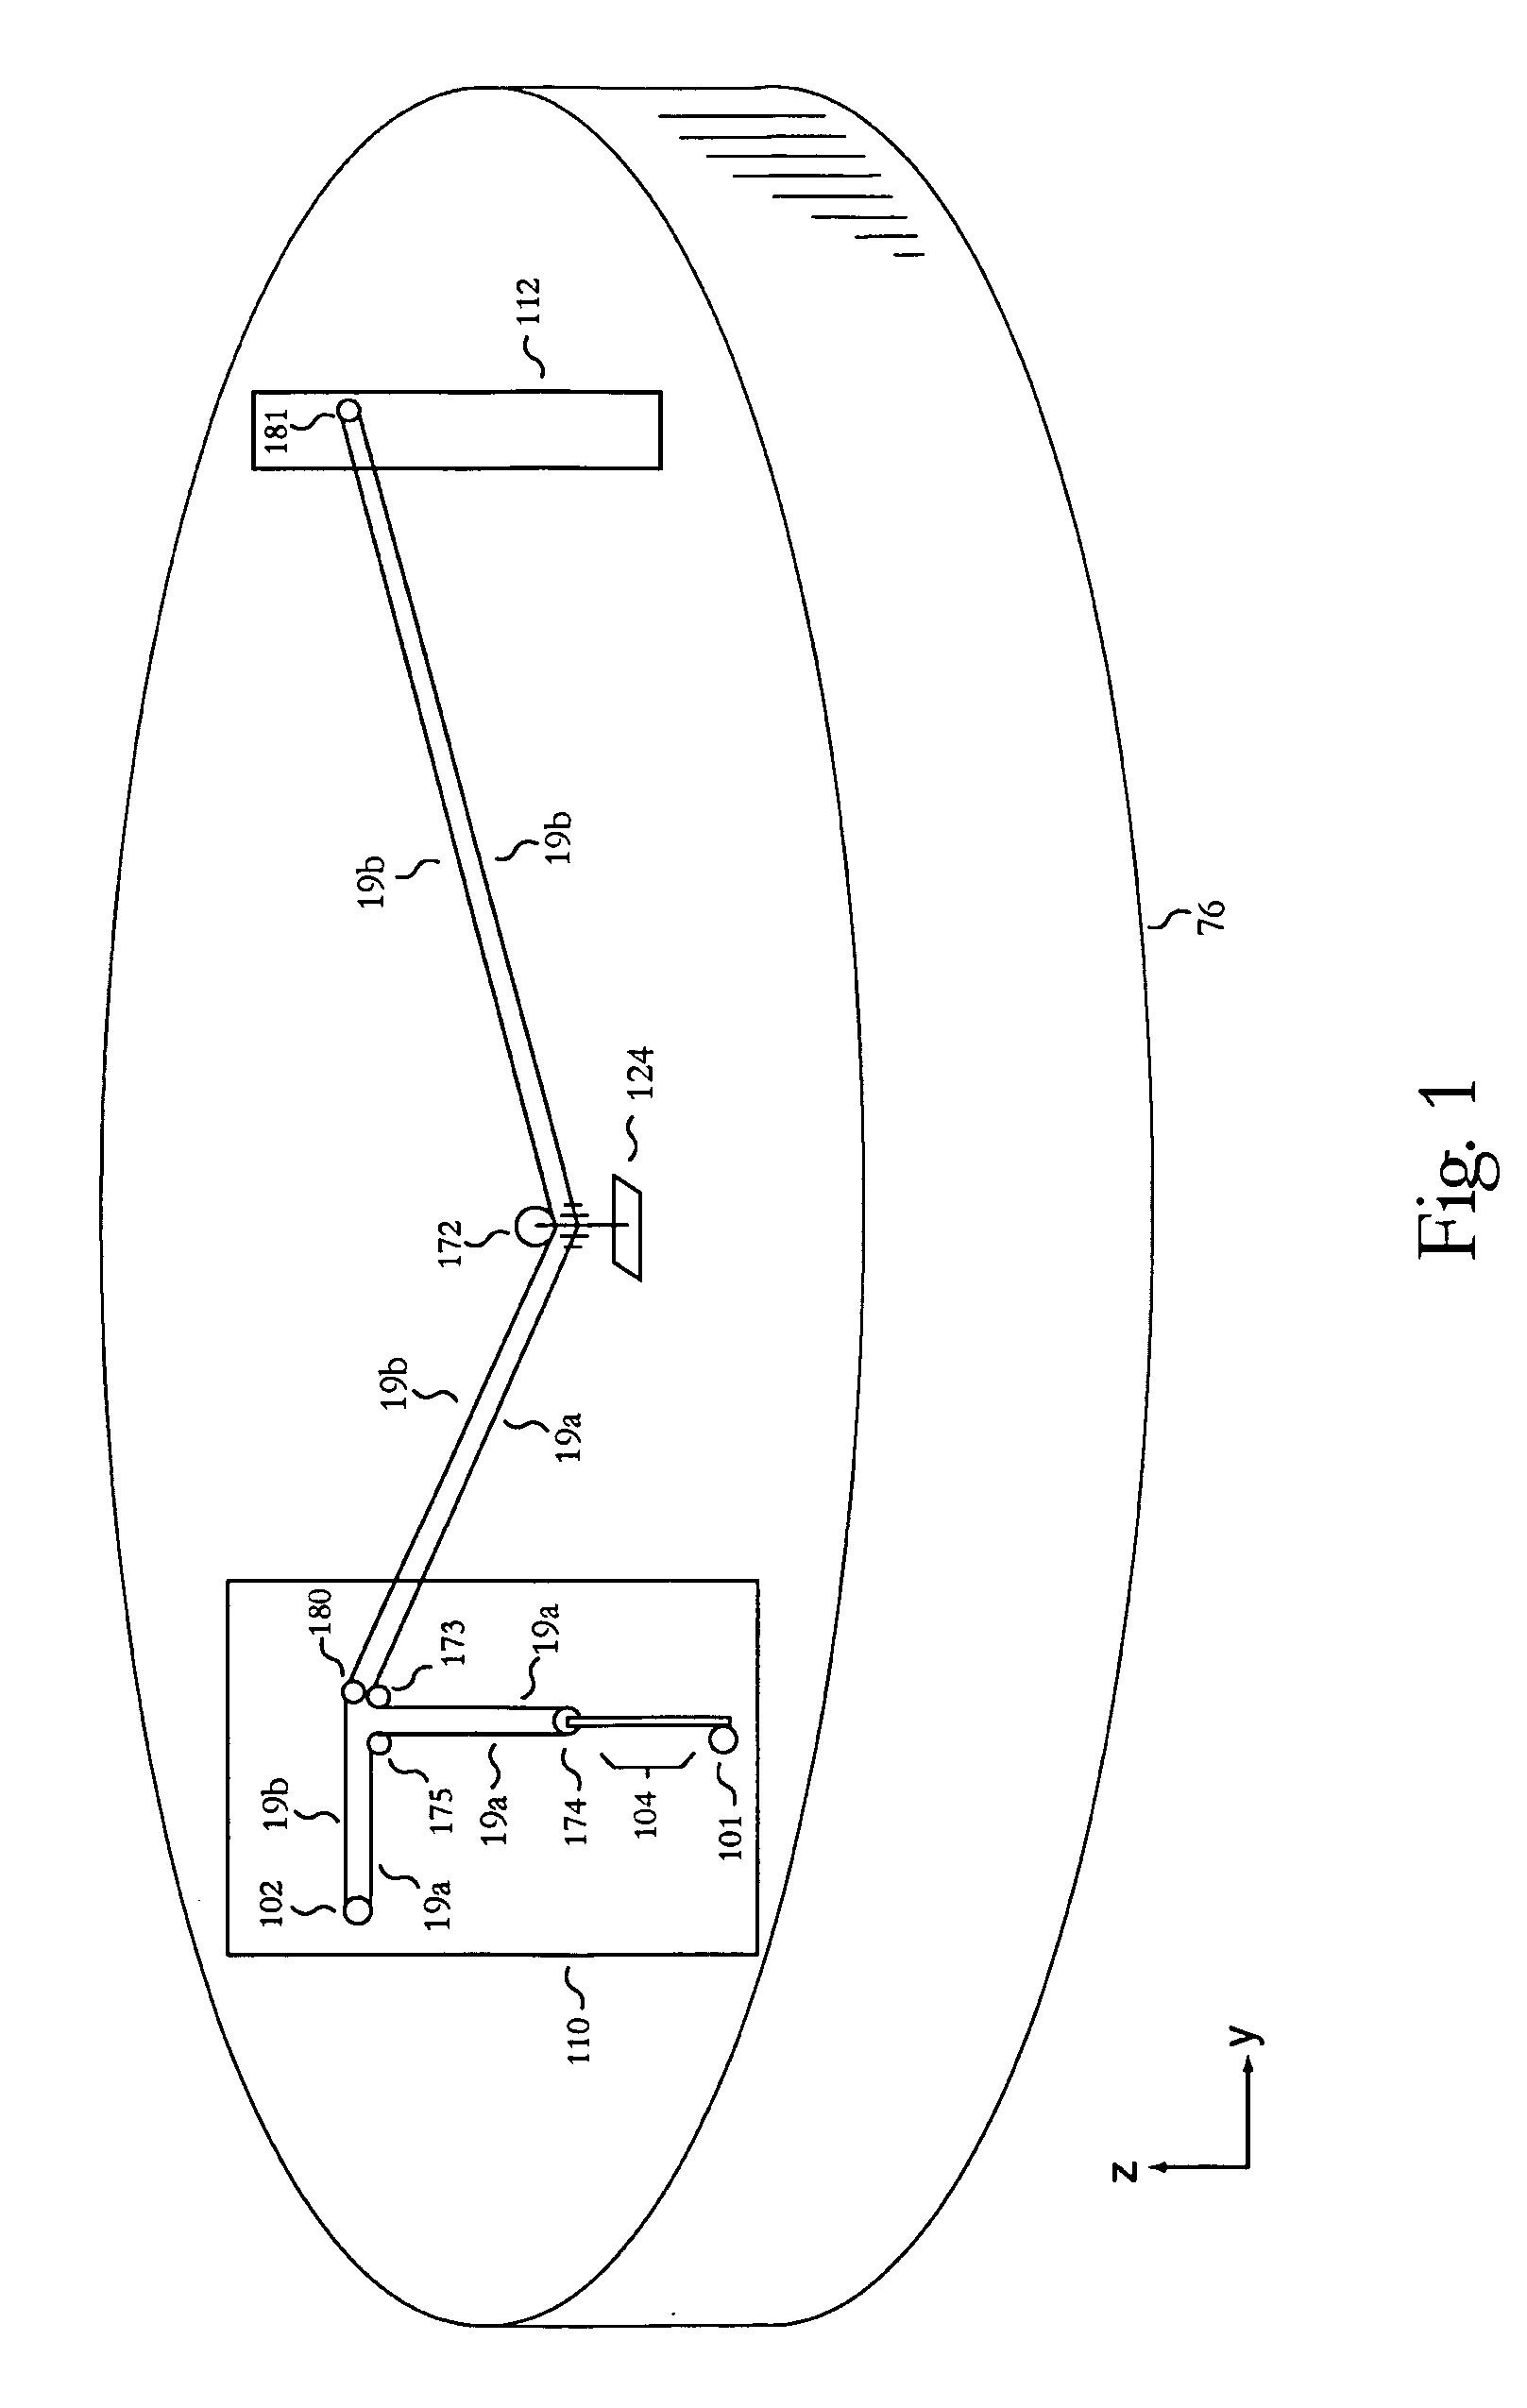 Object movement system and method